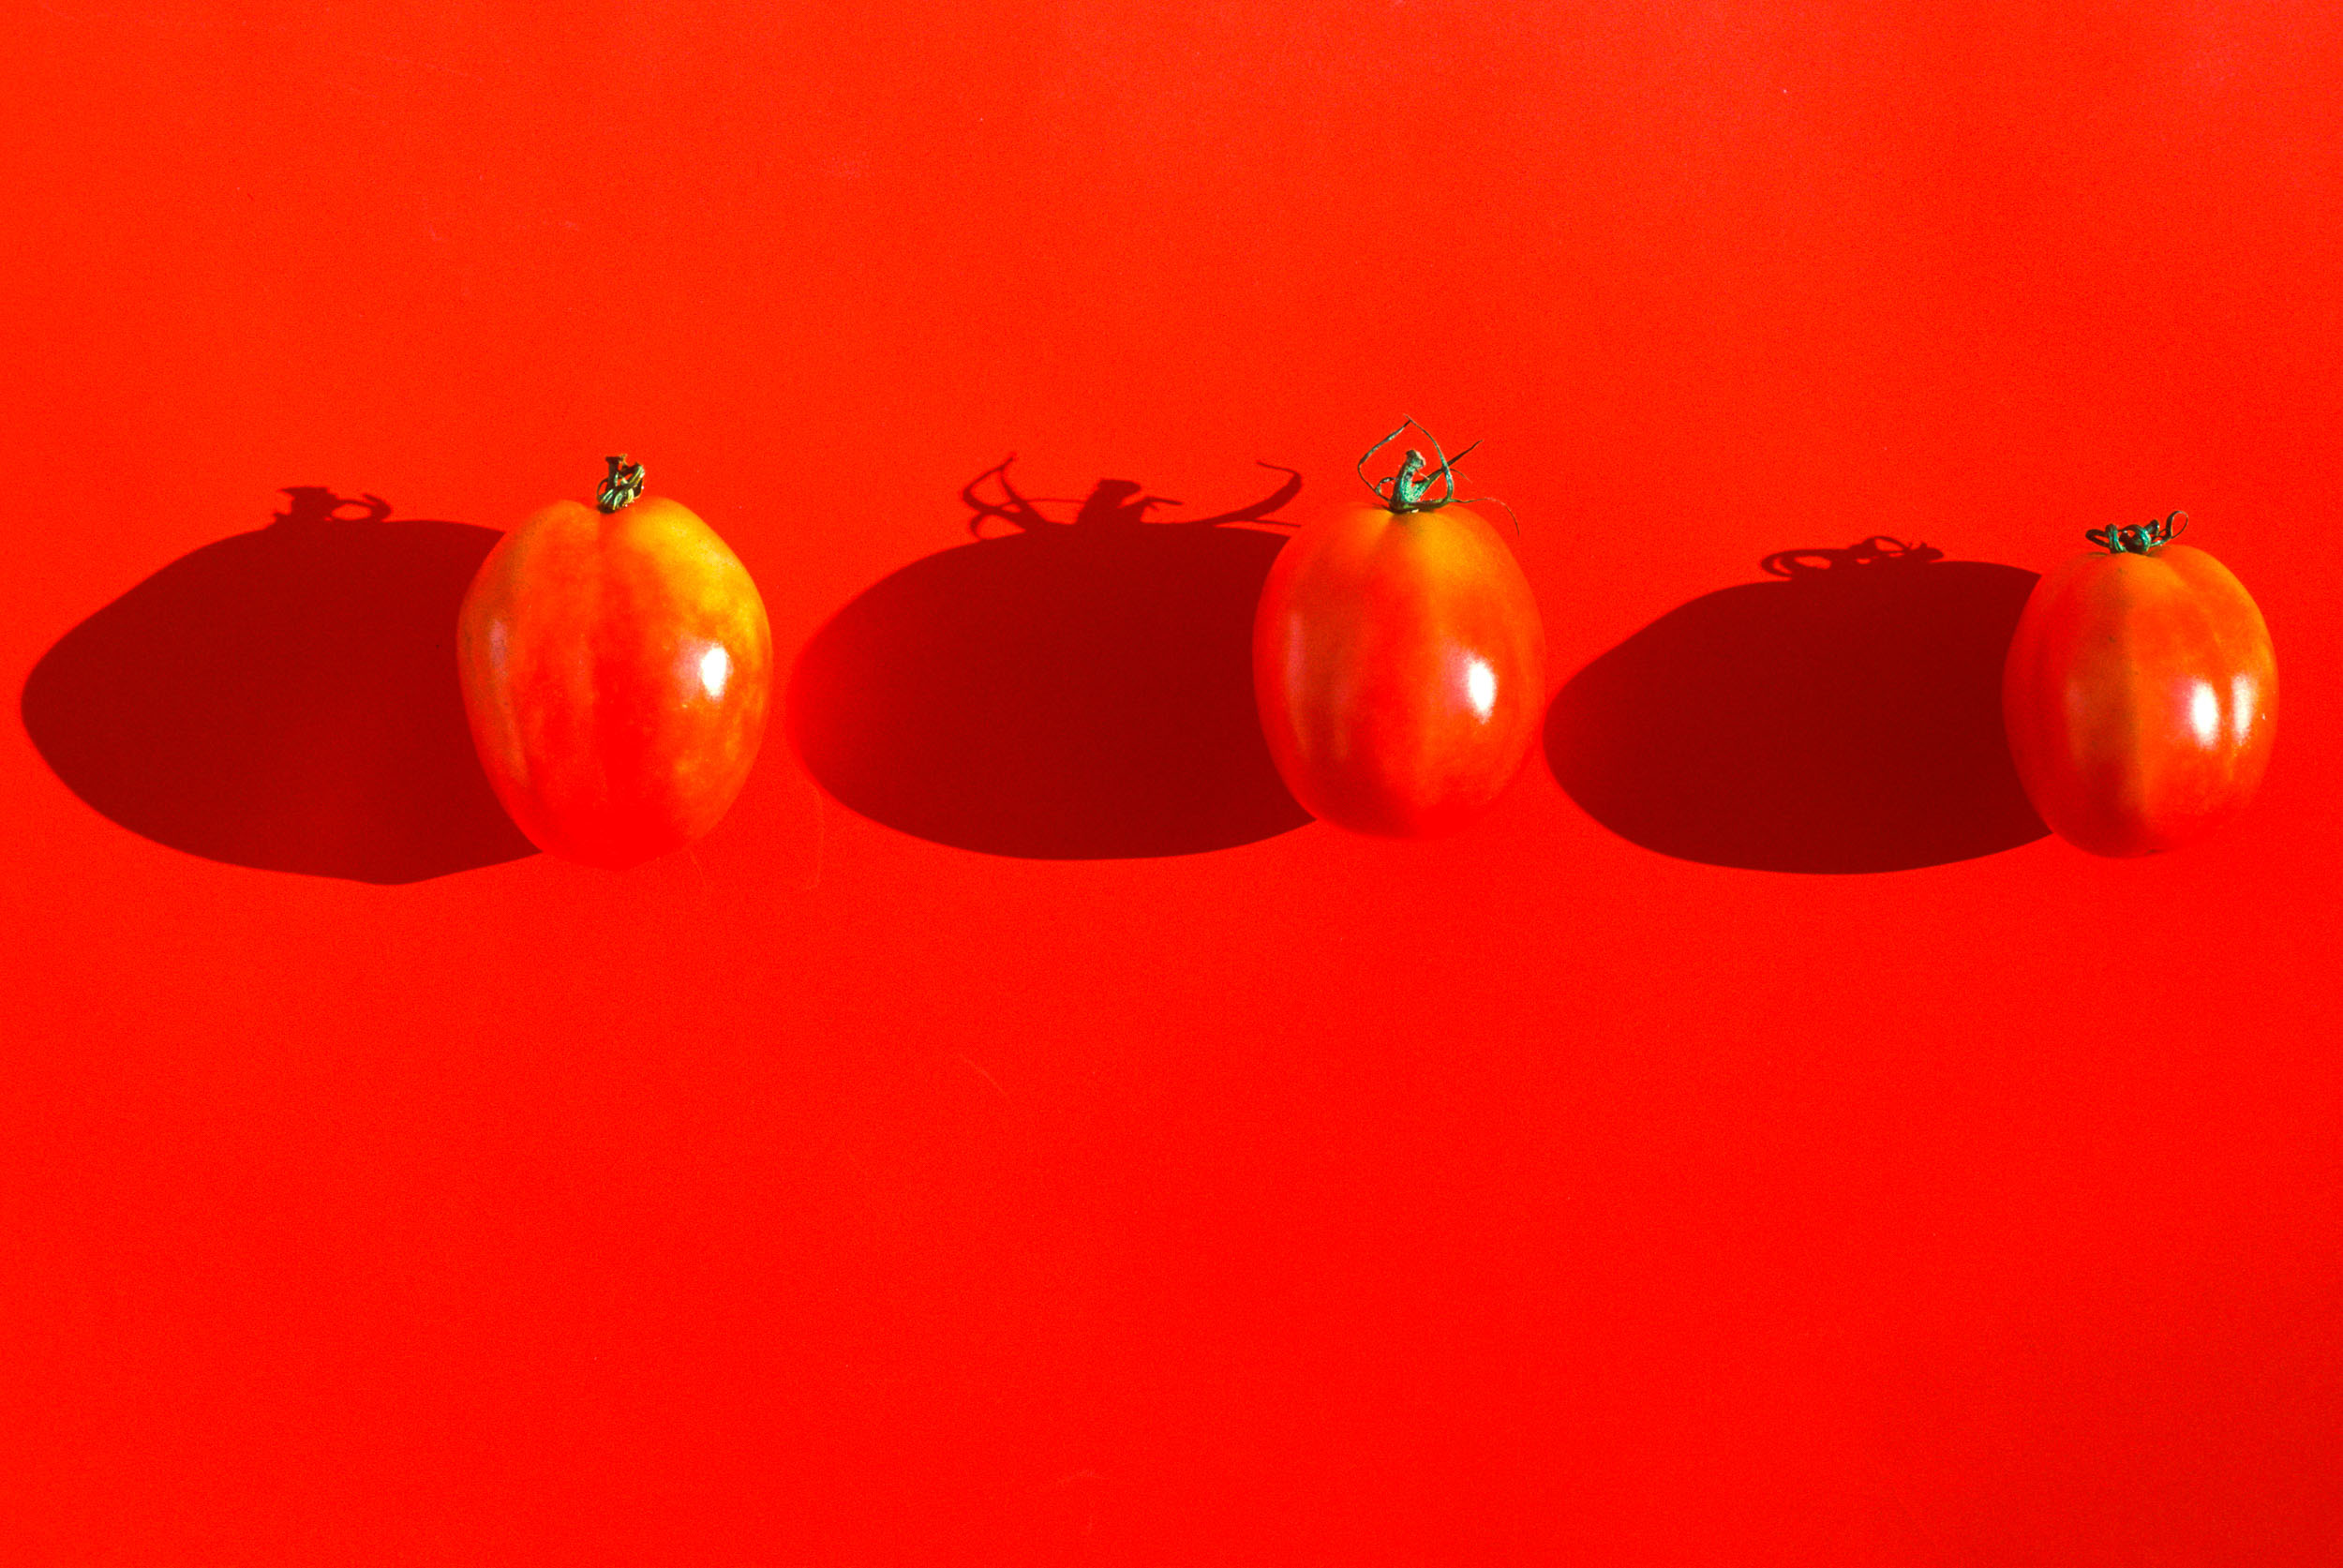 Tomatoes on Red